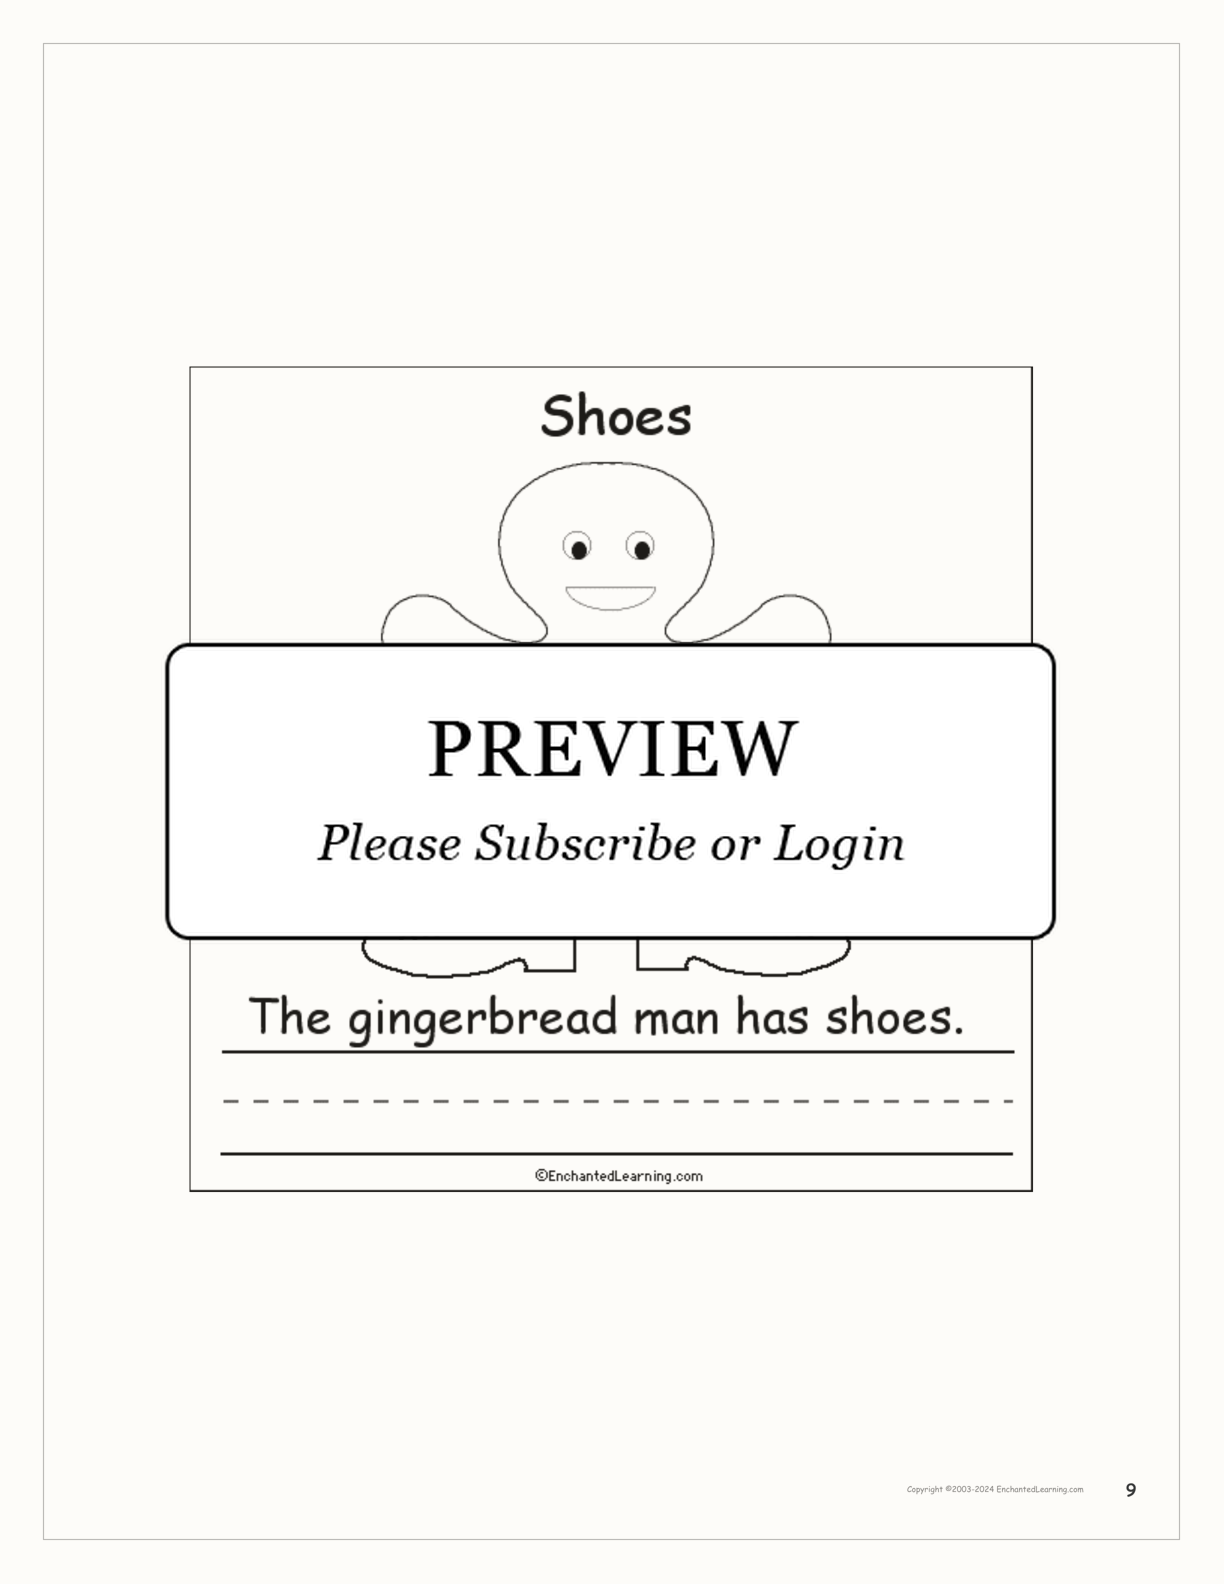 The Gingerbread Man's Clothes: Early Reader Book interactive worksheet page 9